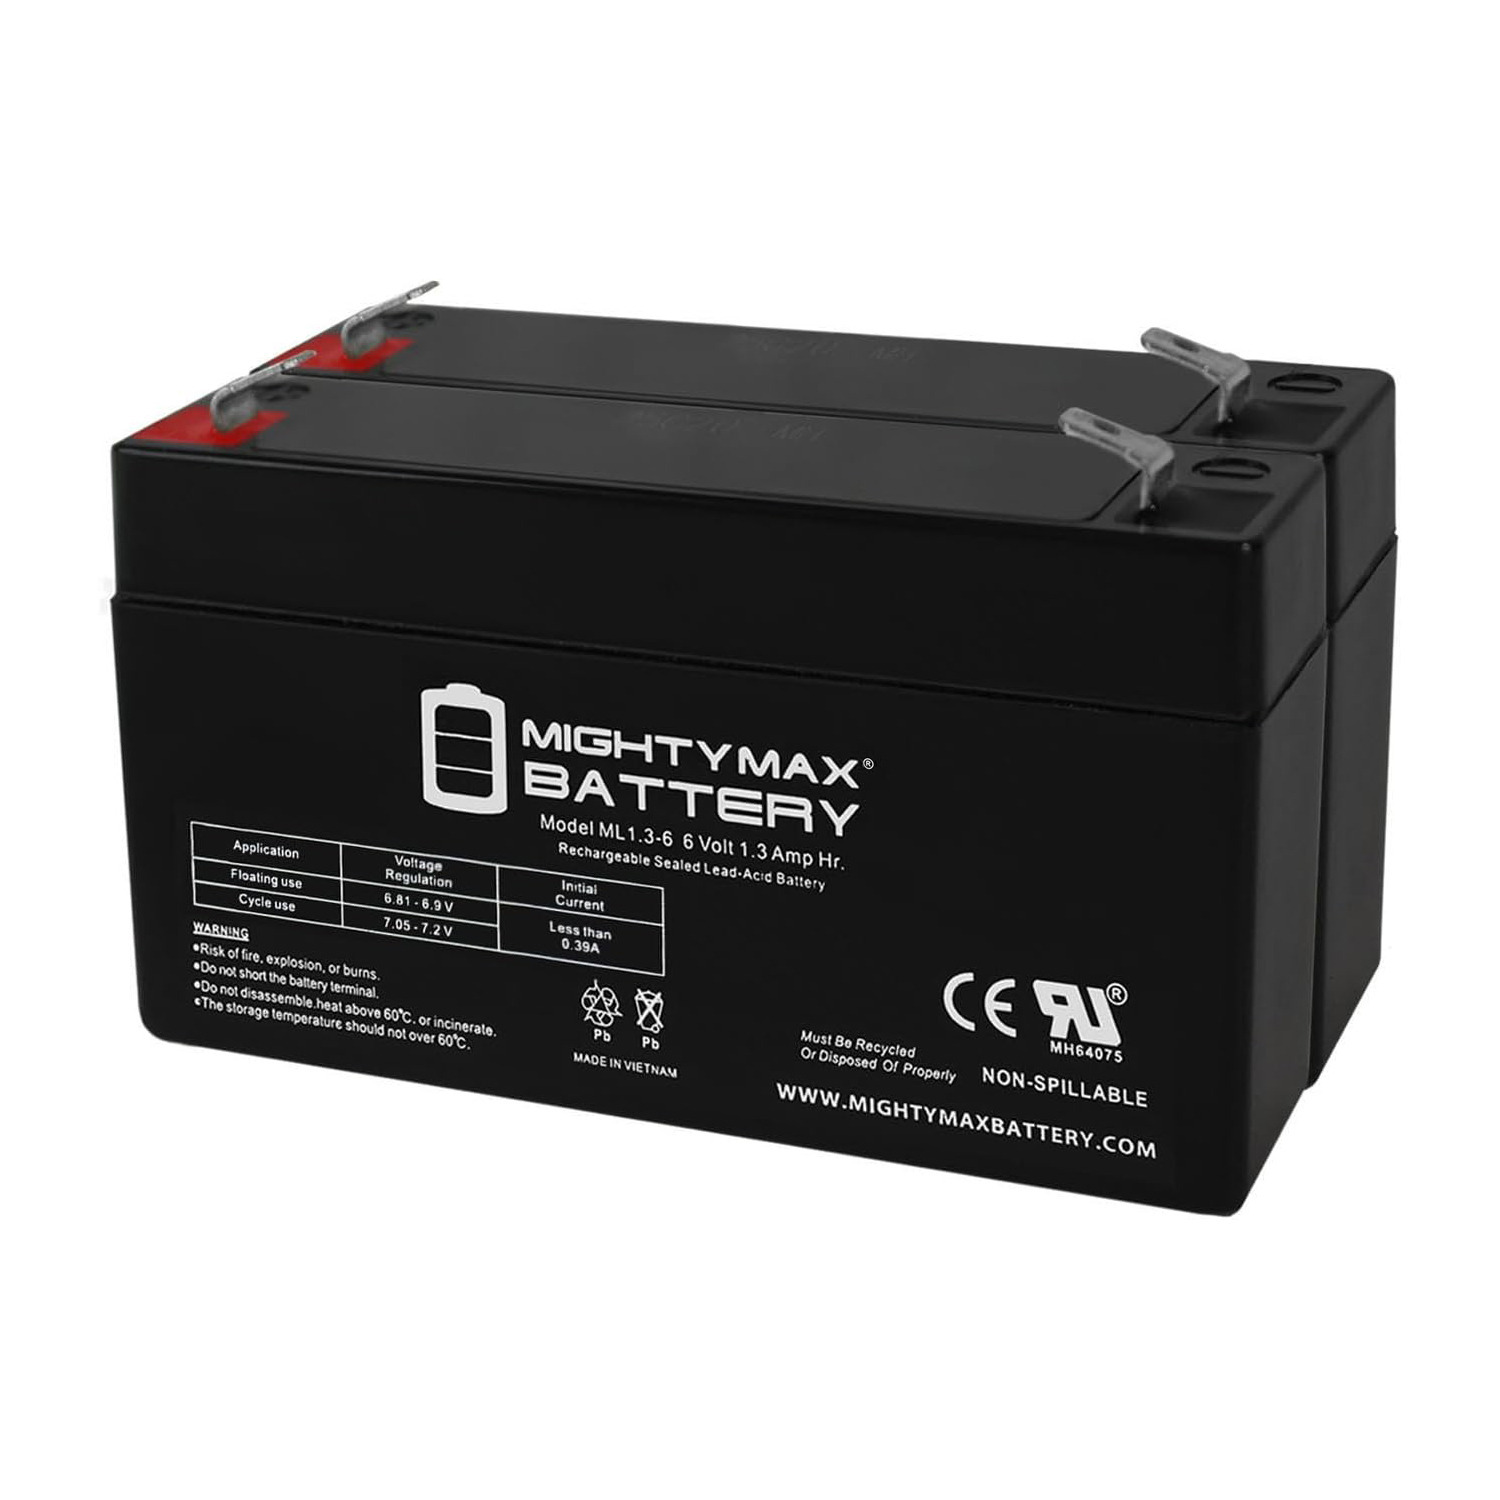 6V 1.3Ah SLA Replacement Battery for Johnson Control JC612 - 2 Pack